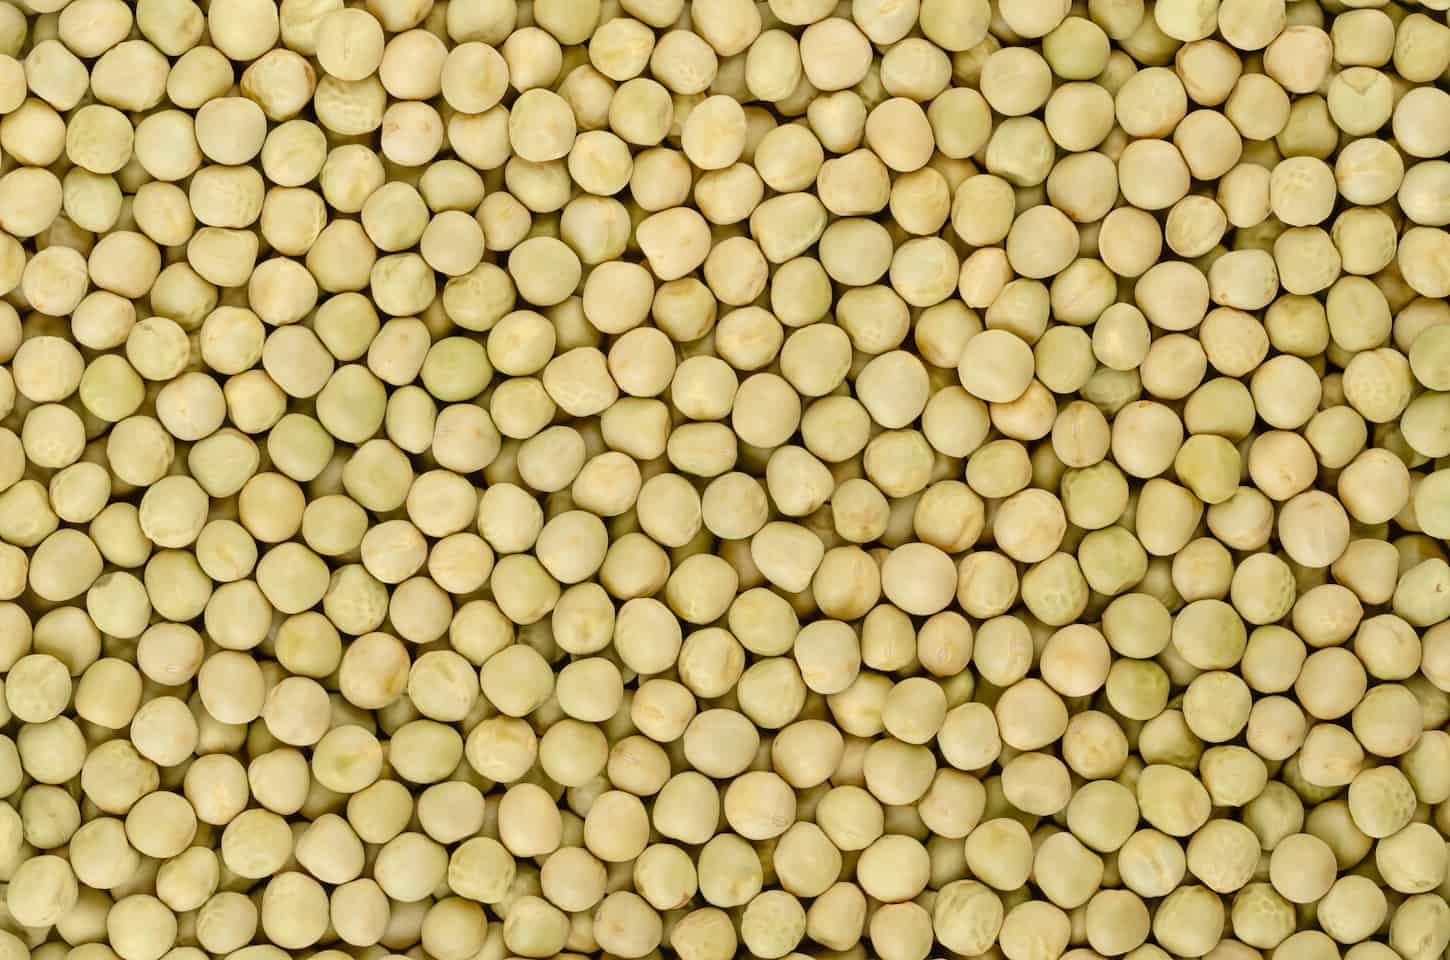 An image of Dried whole peas.